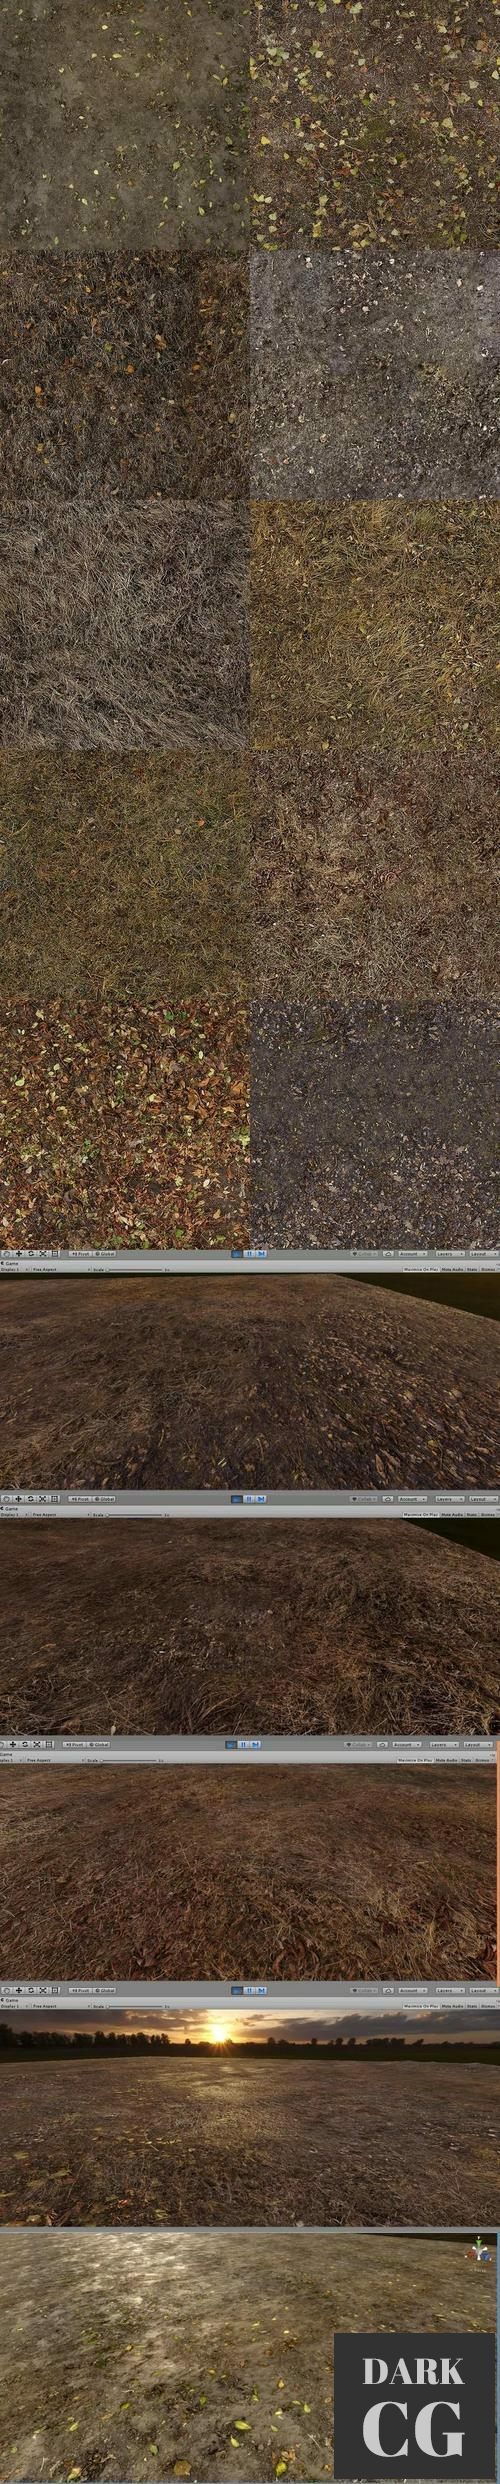 Unity Asset Store Dry Grass and Mud Photo Texture